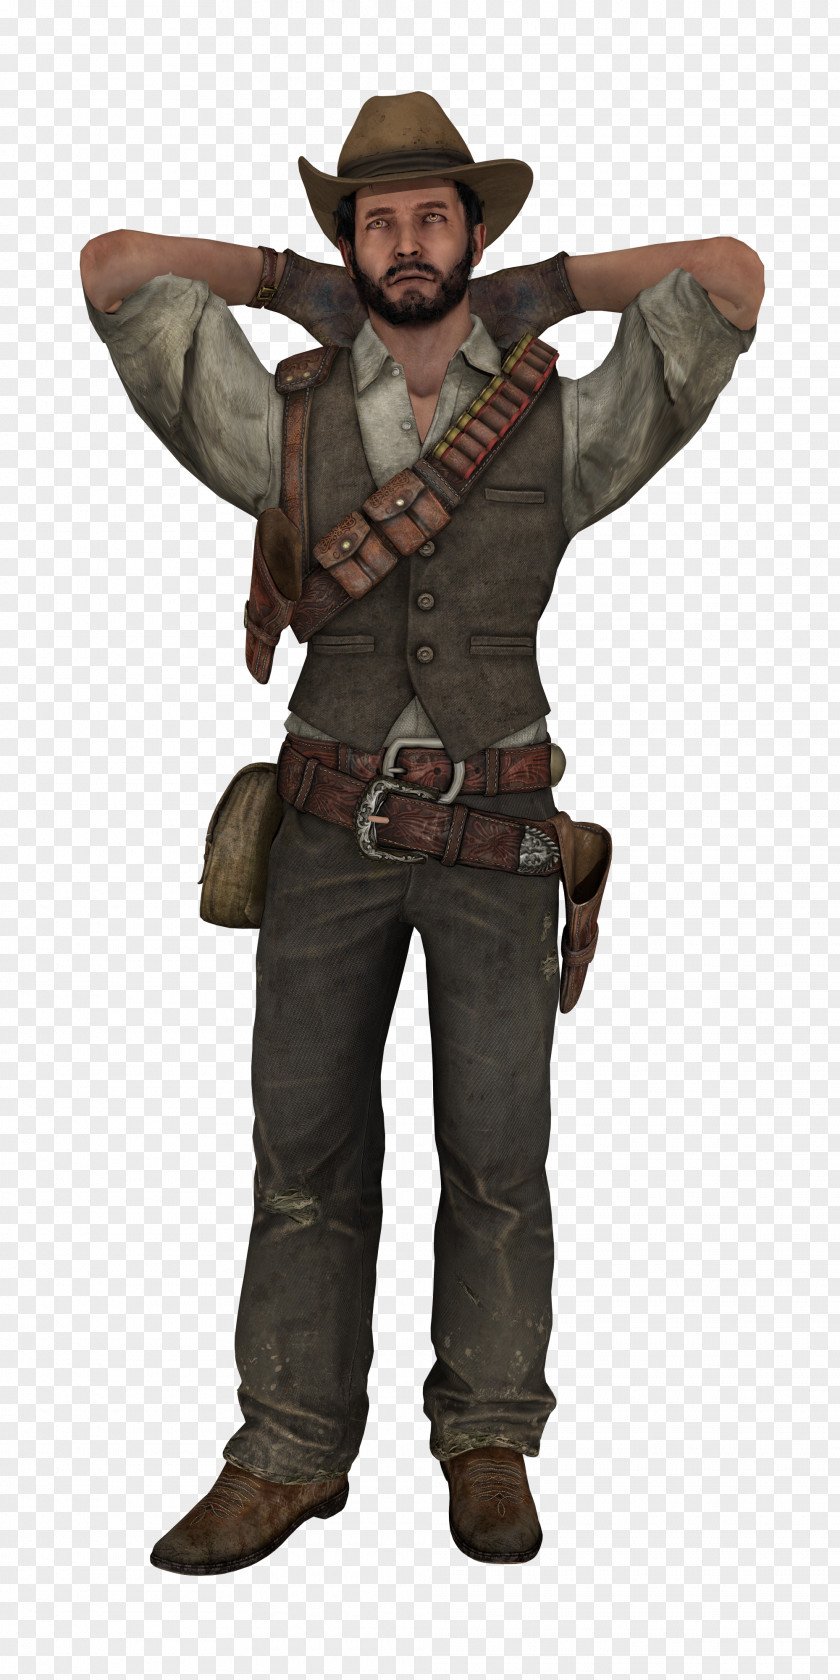 Red Dead Redemption John Marston Deadfall Adventures Game Image PNG